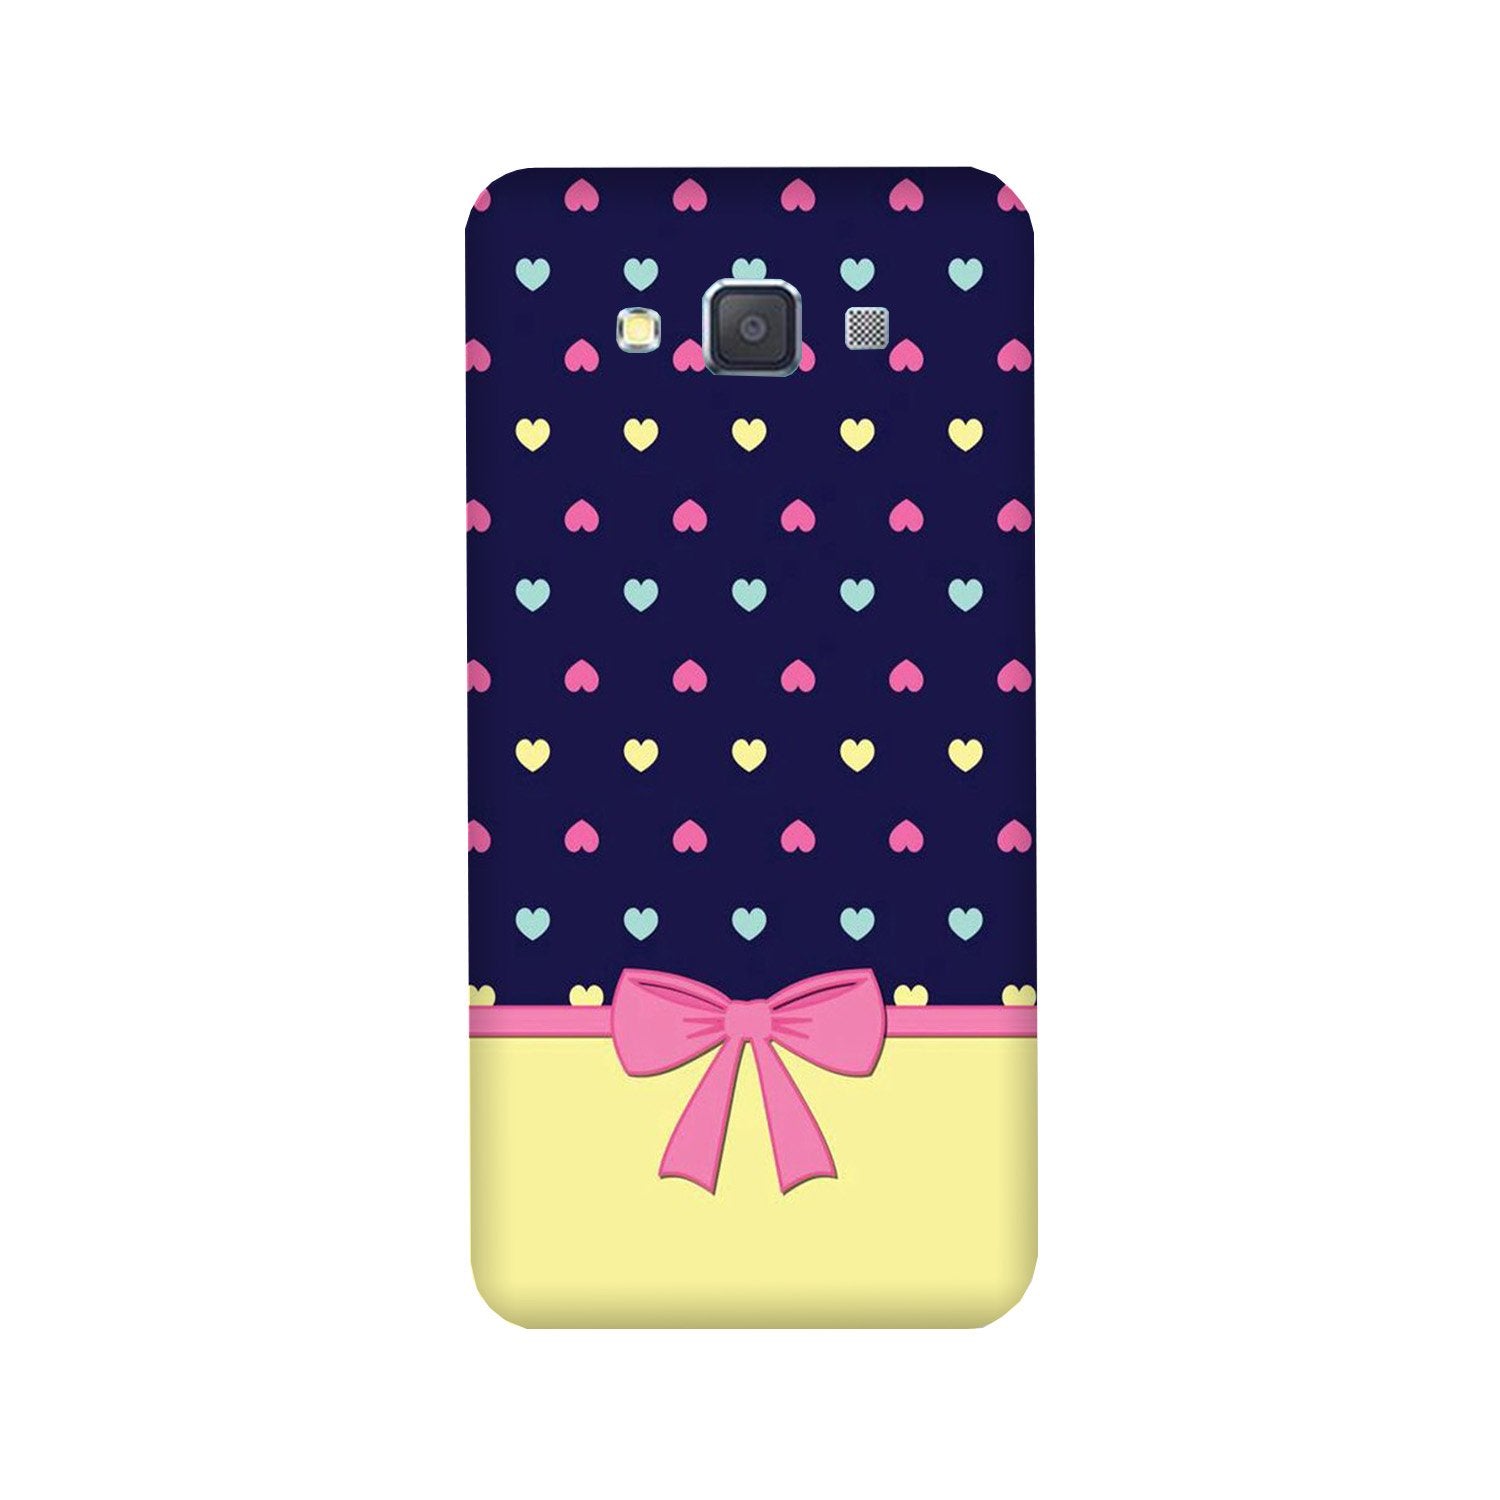 Gift Wrap5 Case for Galaxy A3 (2015)